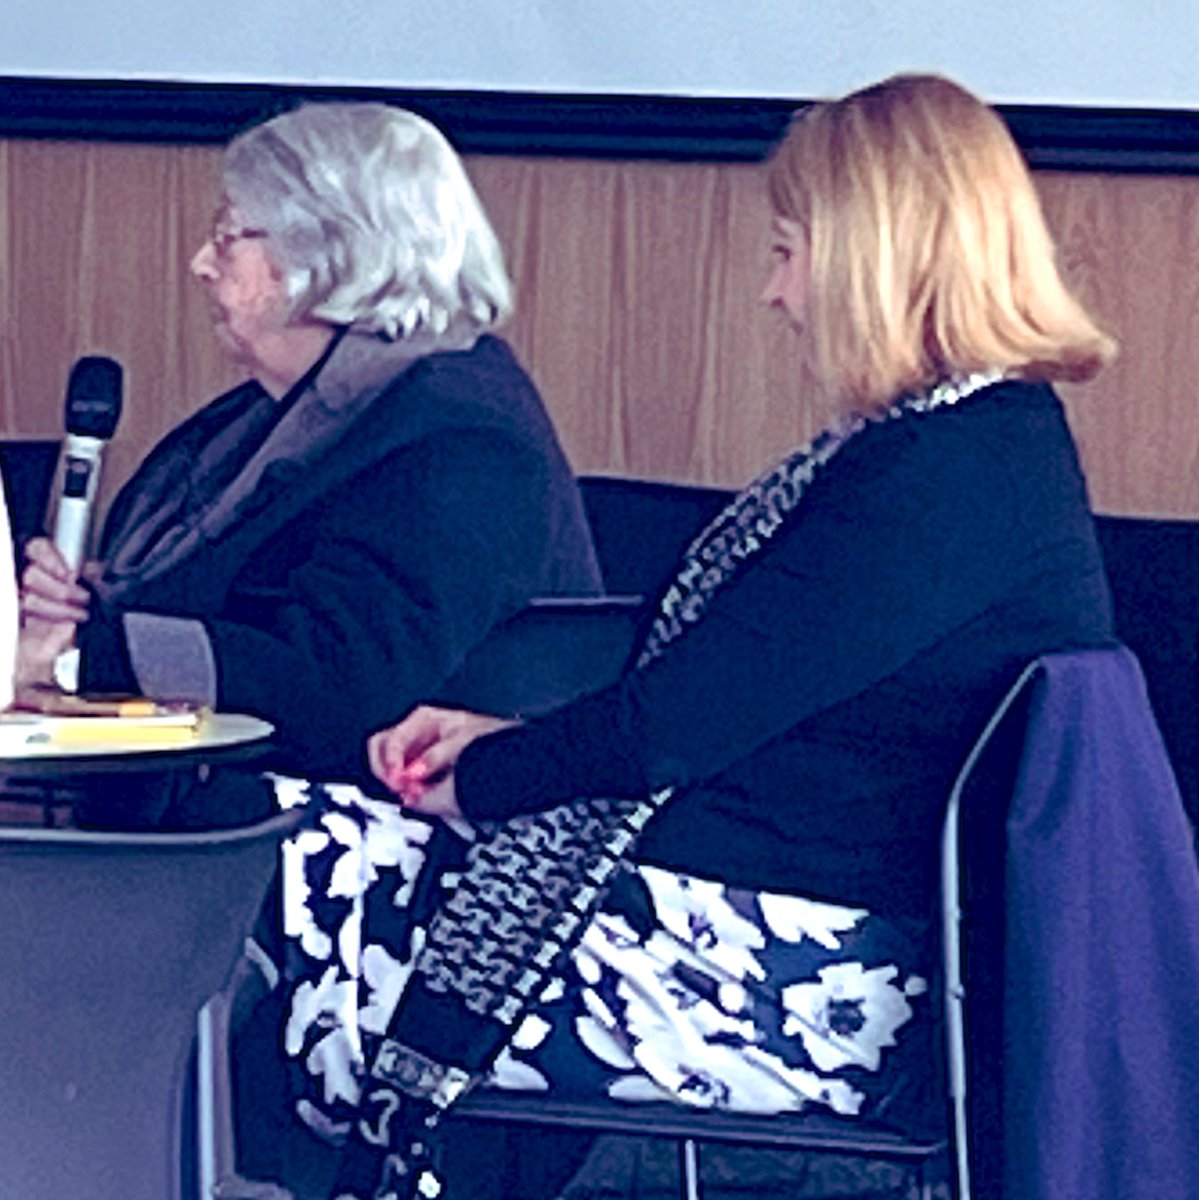 To be comfortable, to be loved, to have the people you want in the room (& not those you don’t want), to listen to your music. To have #HealthProfessionals who understand you don’t want to rust out, you want to blaze out! Judith Leeson AM - Unpaid #Carers Forum #EndOfLifeCare